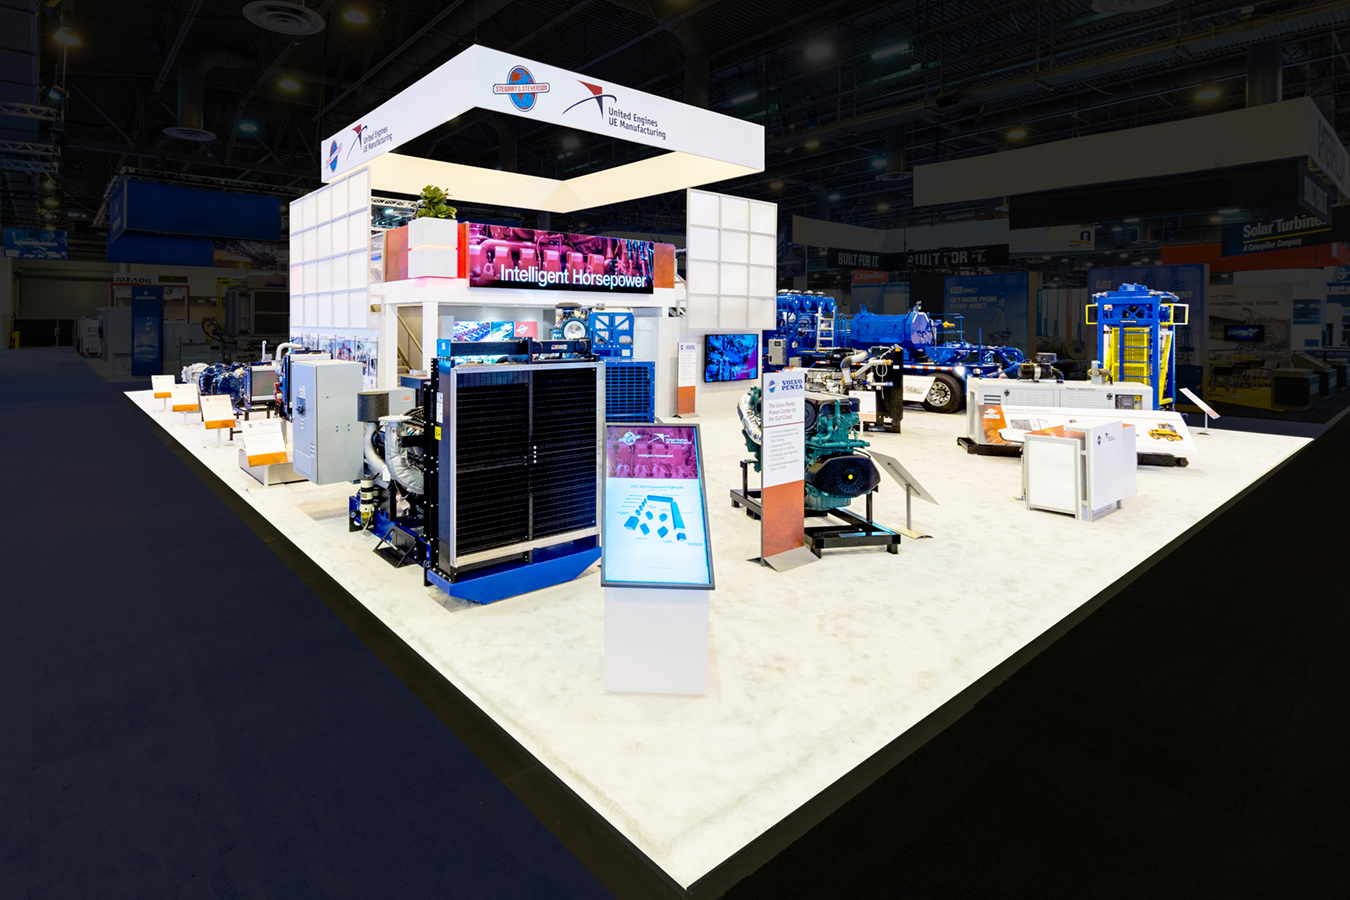 The Utility Expo Tradeshow Displays & Event Services